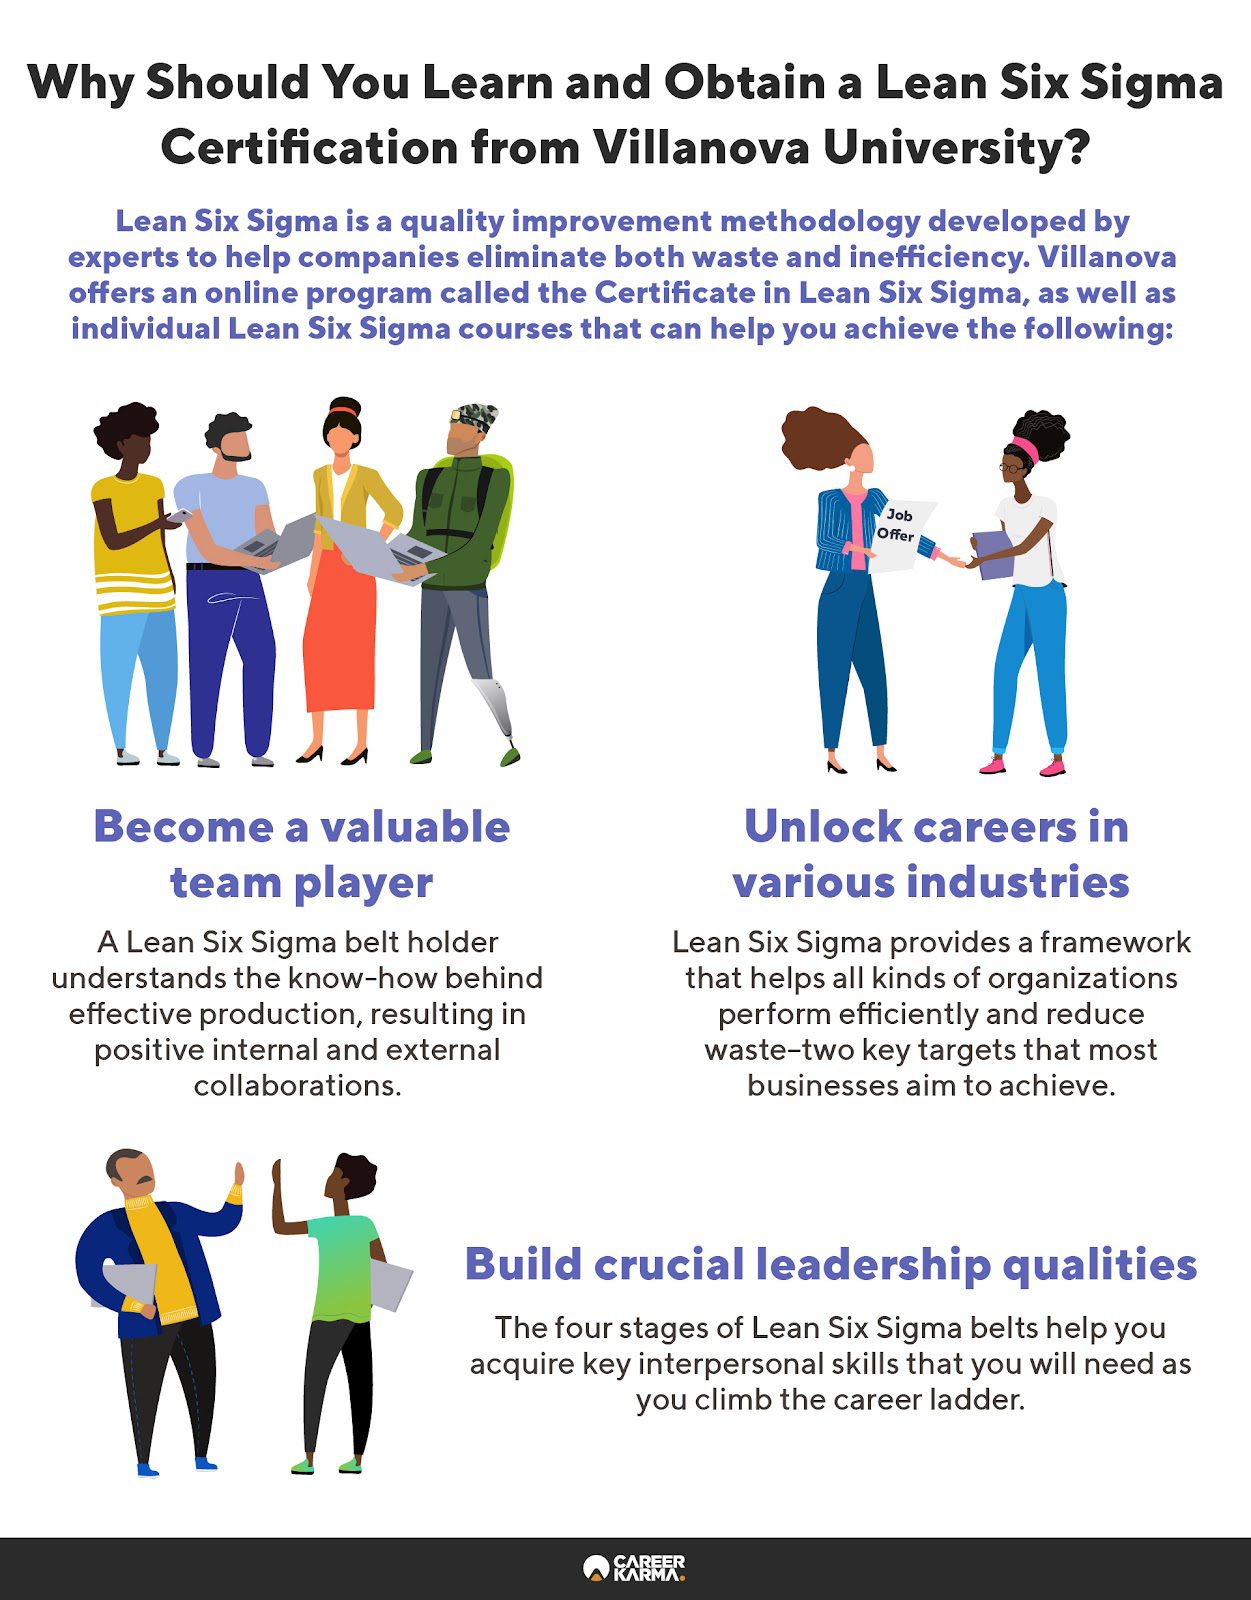 An infographic covering the key features of Villanova University’s Lean Six Sigma Certificate program